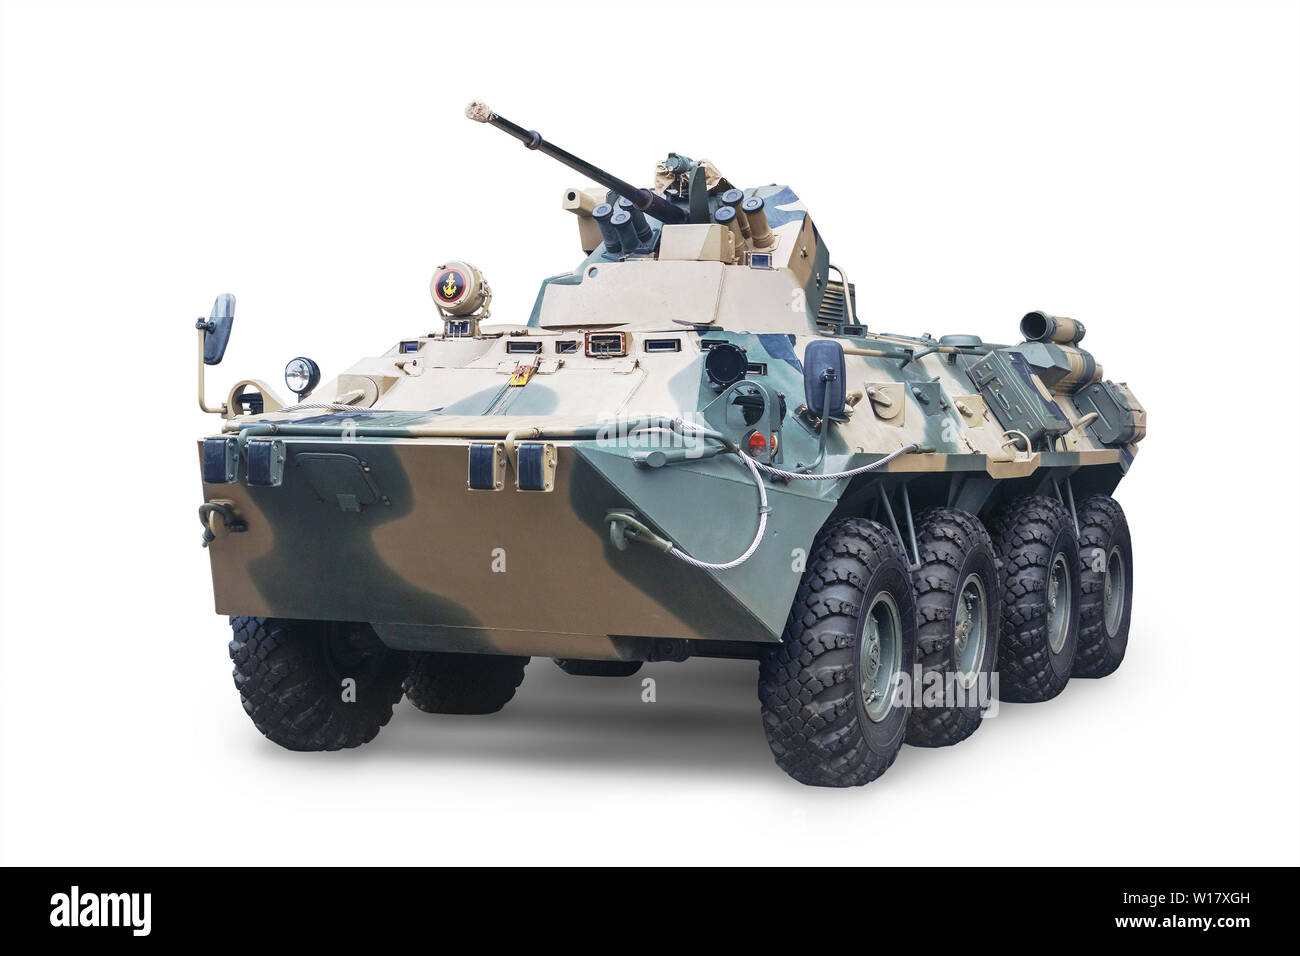 Armored personnel carrier 82-a or armored transporter, BTR-82a - transport and combat vehicle for transporting soldiers. Isolated on white background. Stock Photo